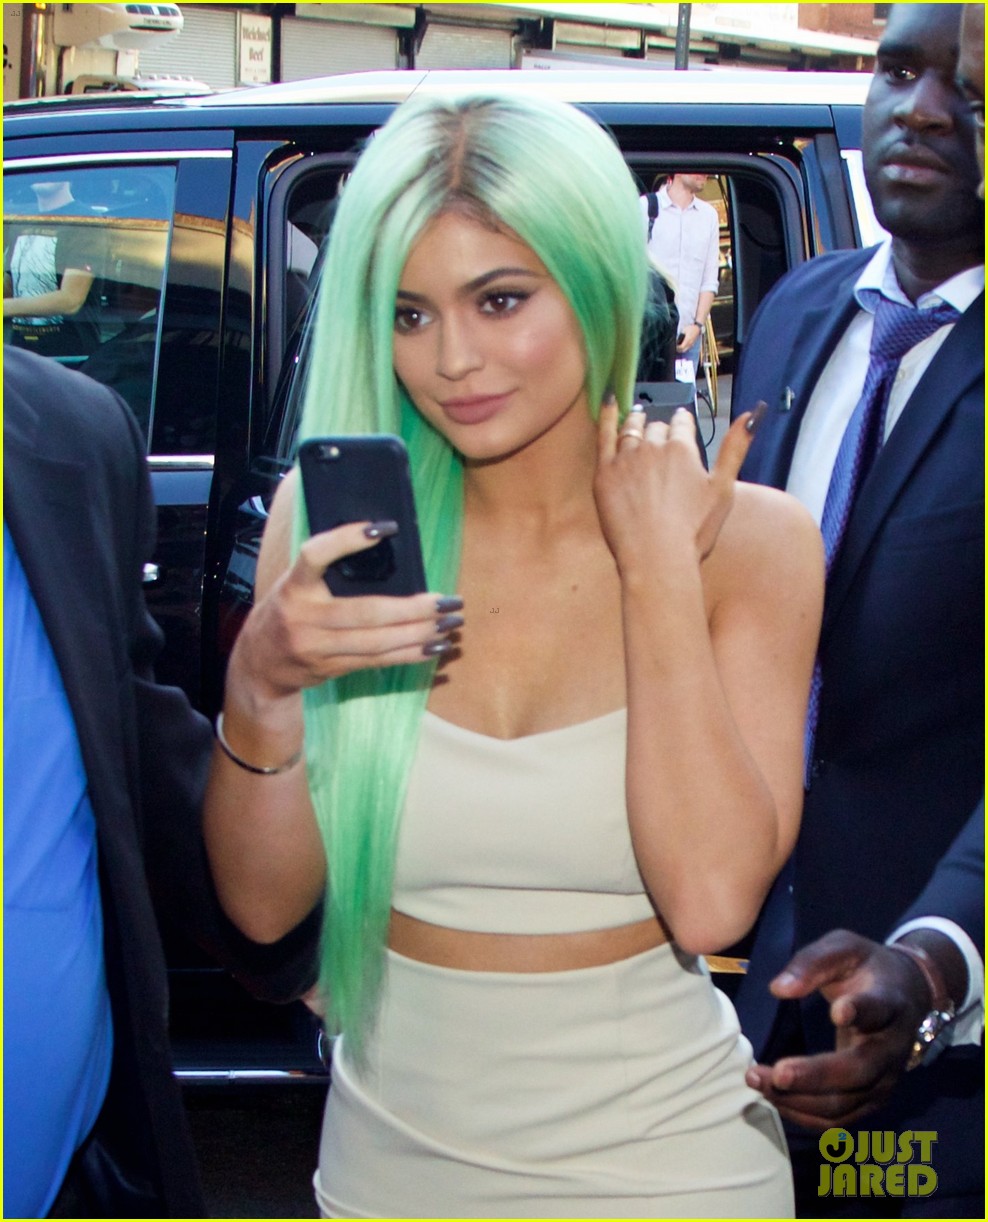 Kylie Jenner Shows Off New Green Hair Mom Kris Speaks Out About